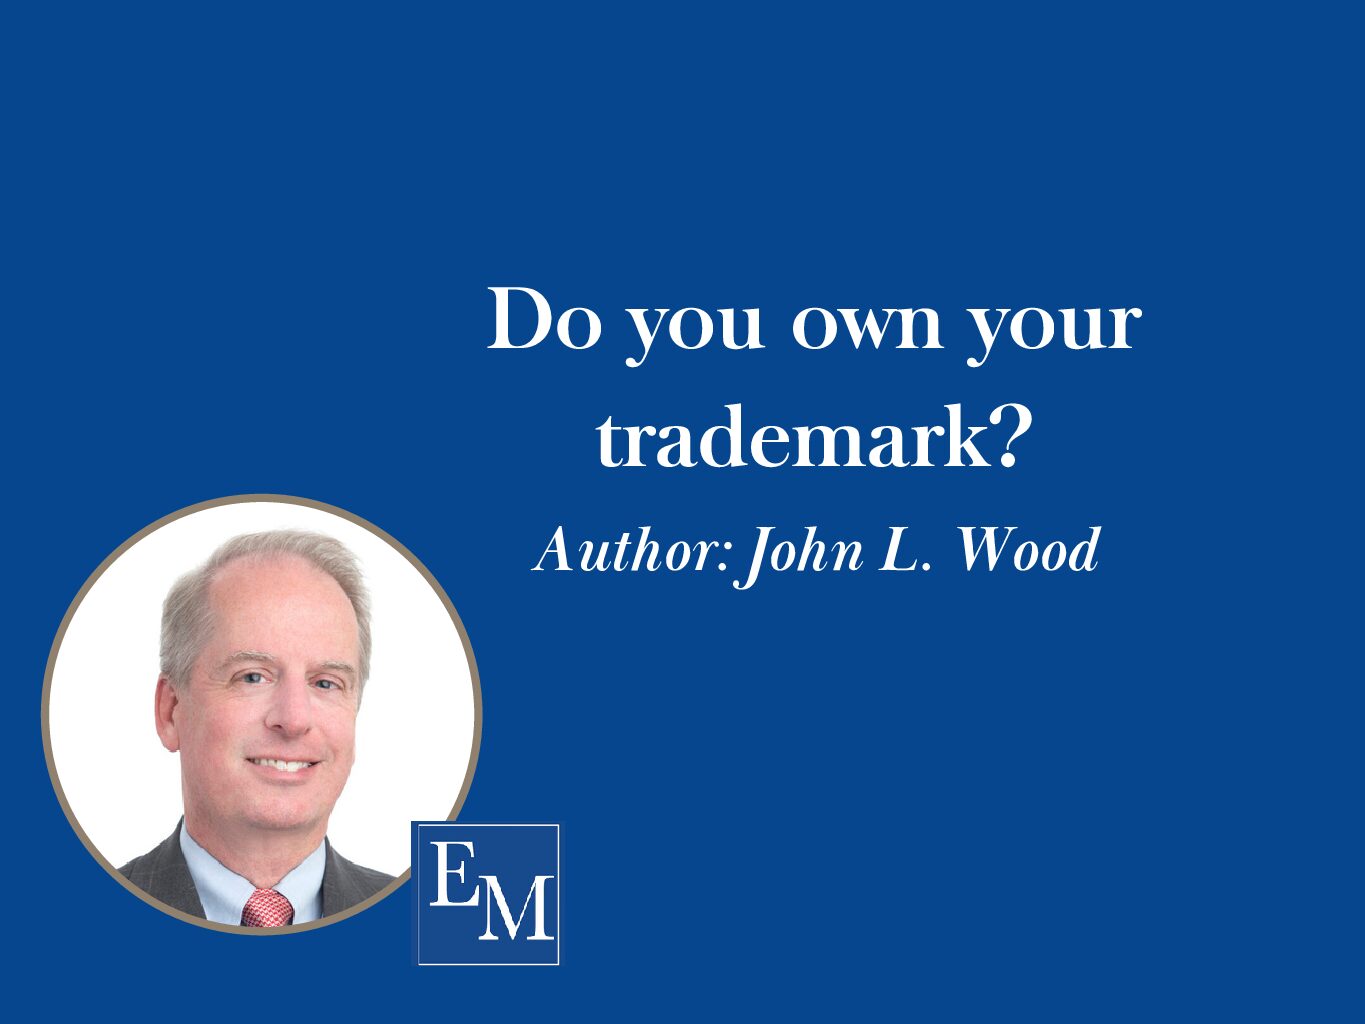 Do you own your trademark?